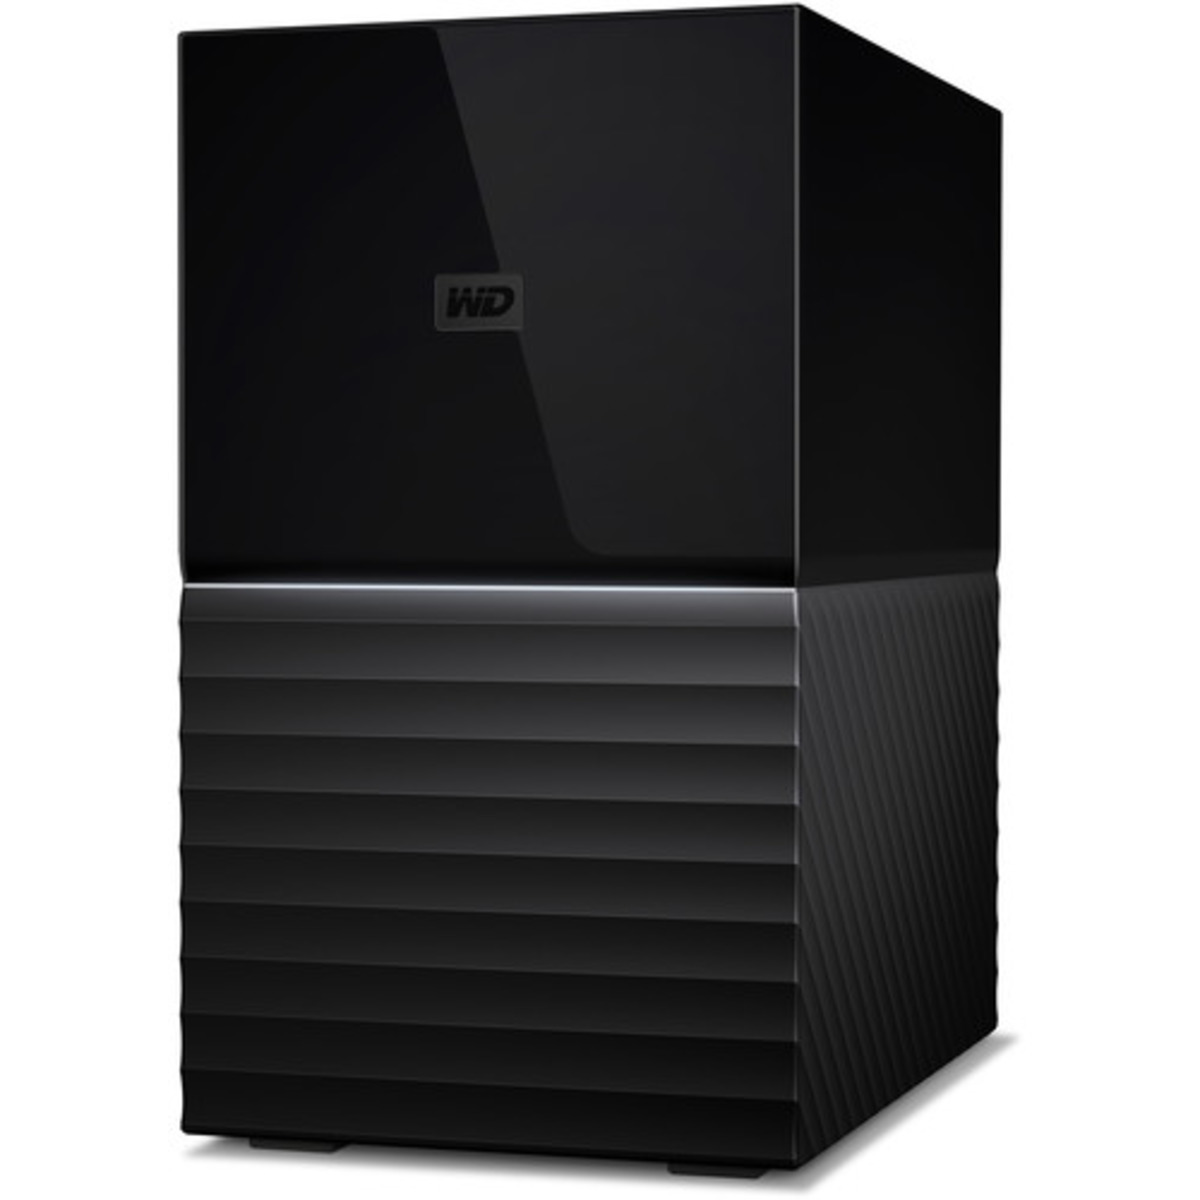 Western Digital My Book DUO Gen 2 12tb 2-Bay Desktop Personal / Basic Home / Small Office DAS - Direct Attached Storage Device 2x6tb Western Digital Red Plus WD60EFPX 3.5 5640rpm SATA 6Gb/s HDD NAS Class Drives Installed - Burn-In Tested - ON SALE My Book DUO Gen 2